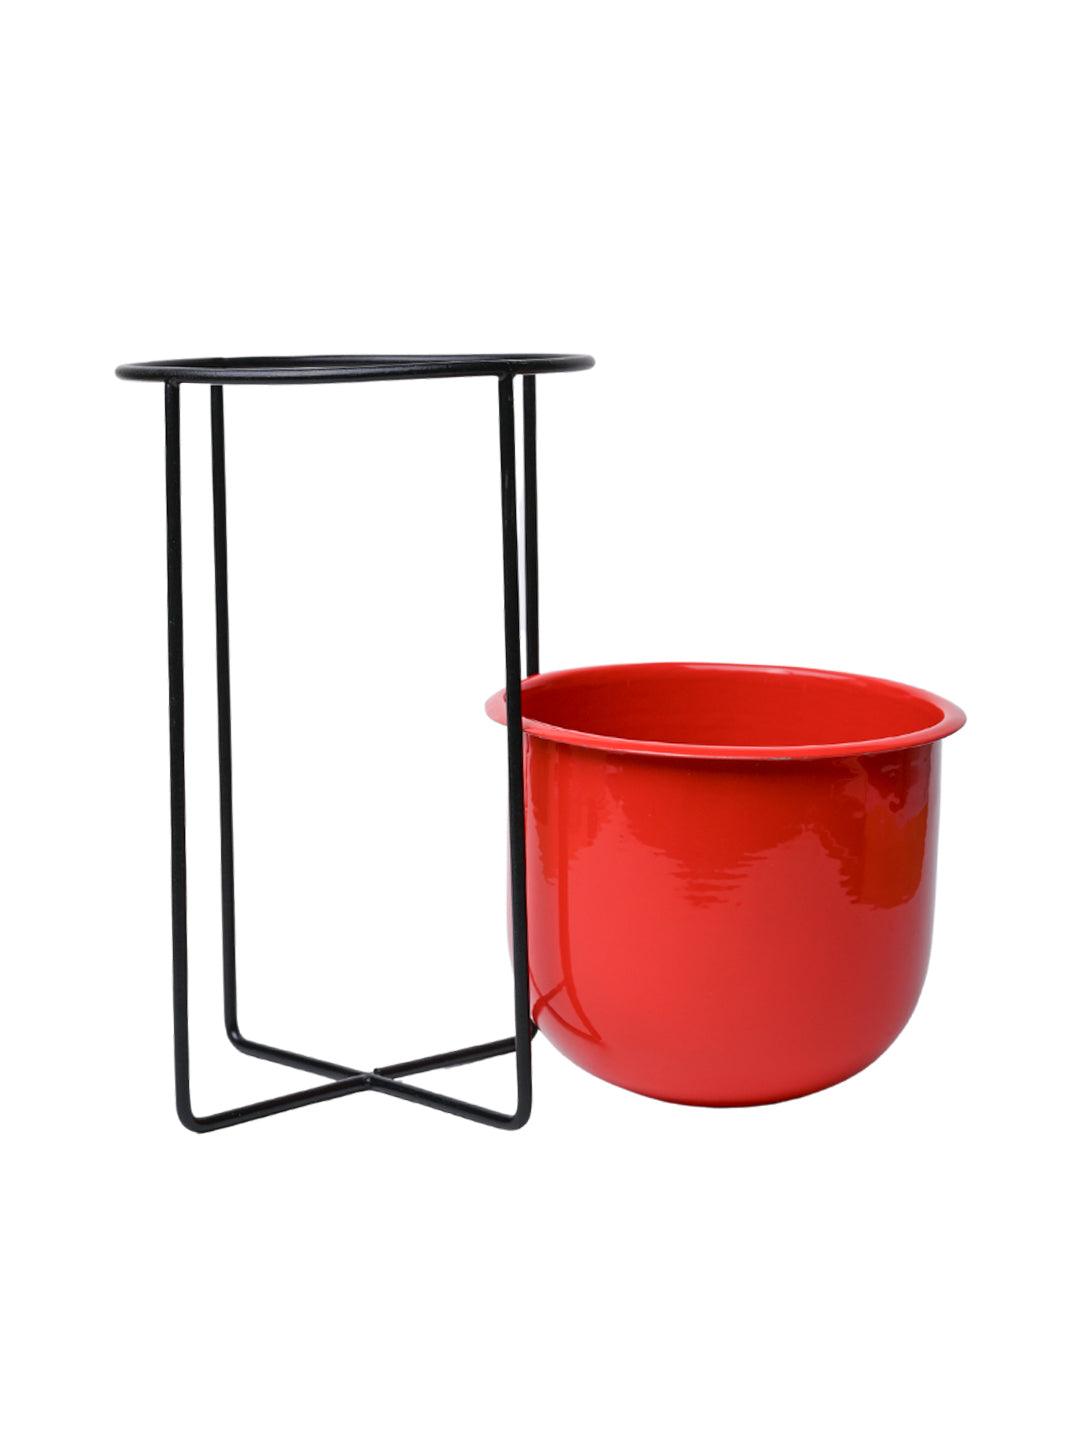 Stylish Red Plant Pot With Stand - MARKET 99